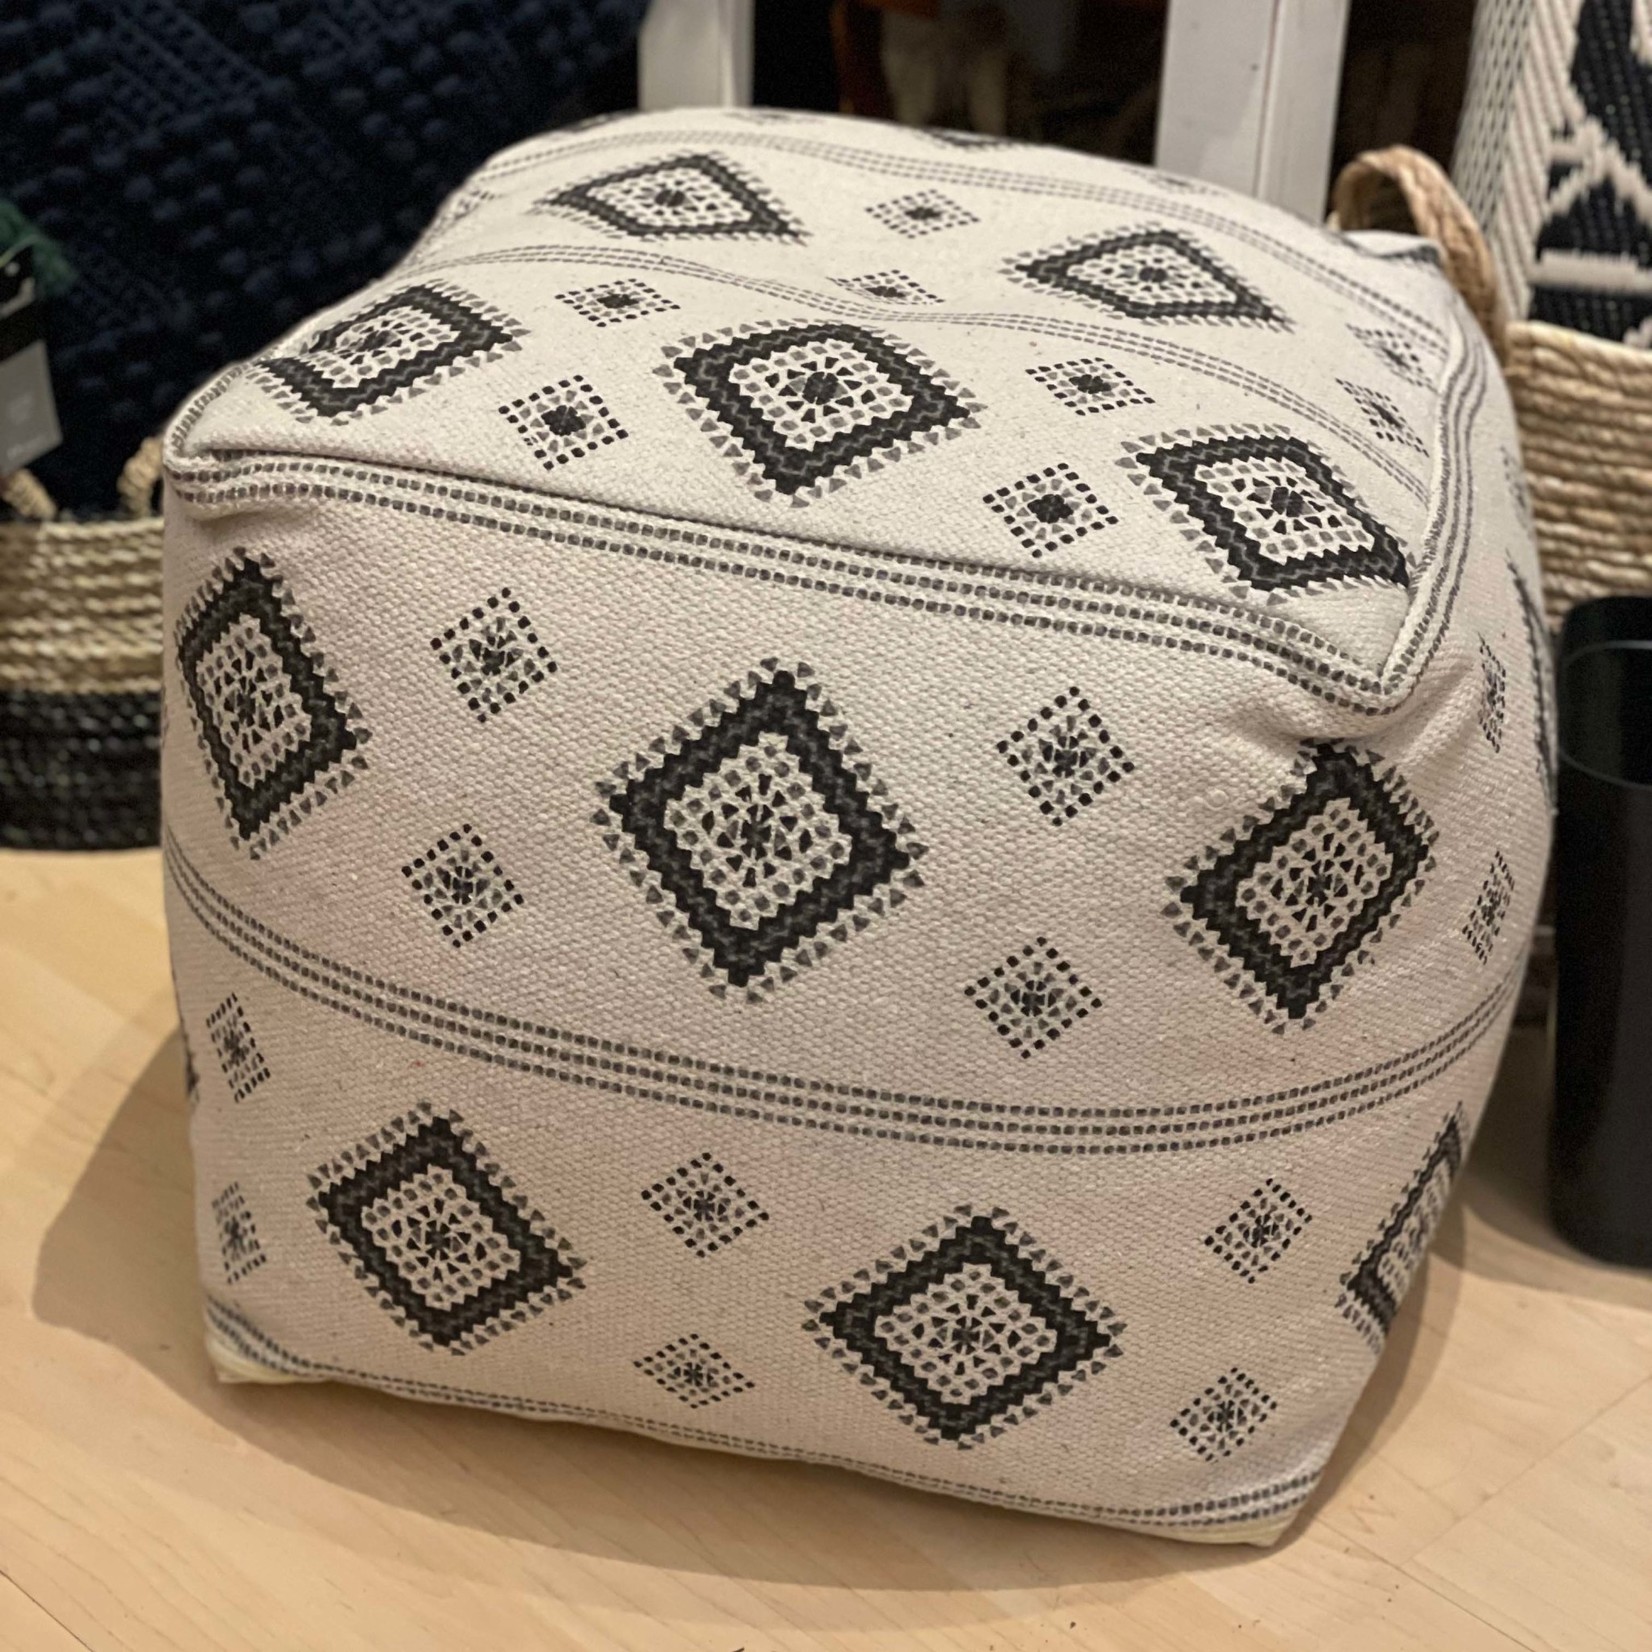 Cream Pouf with Geometric Shapes